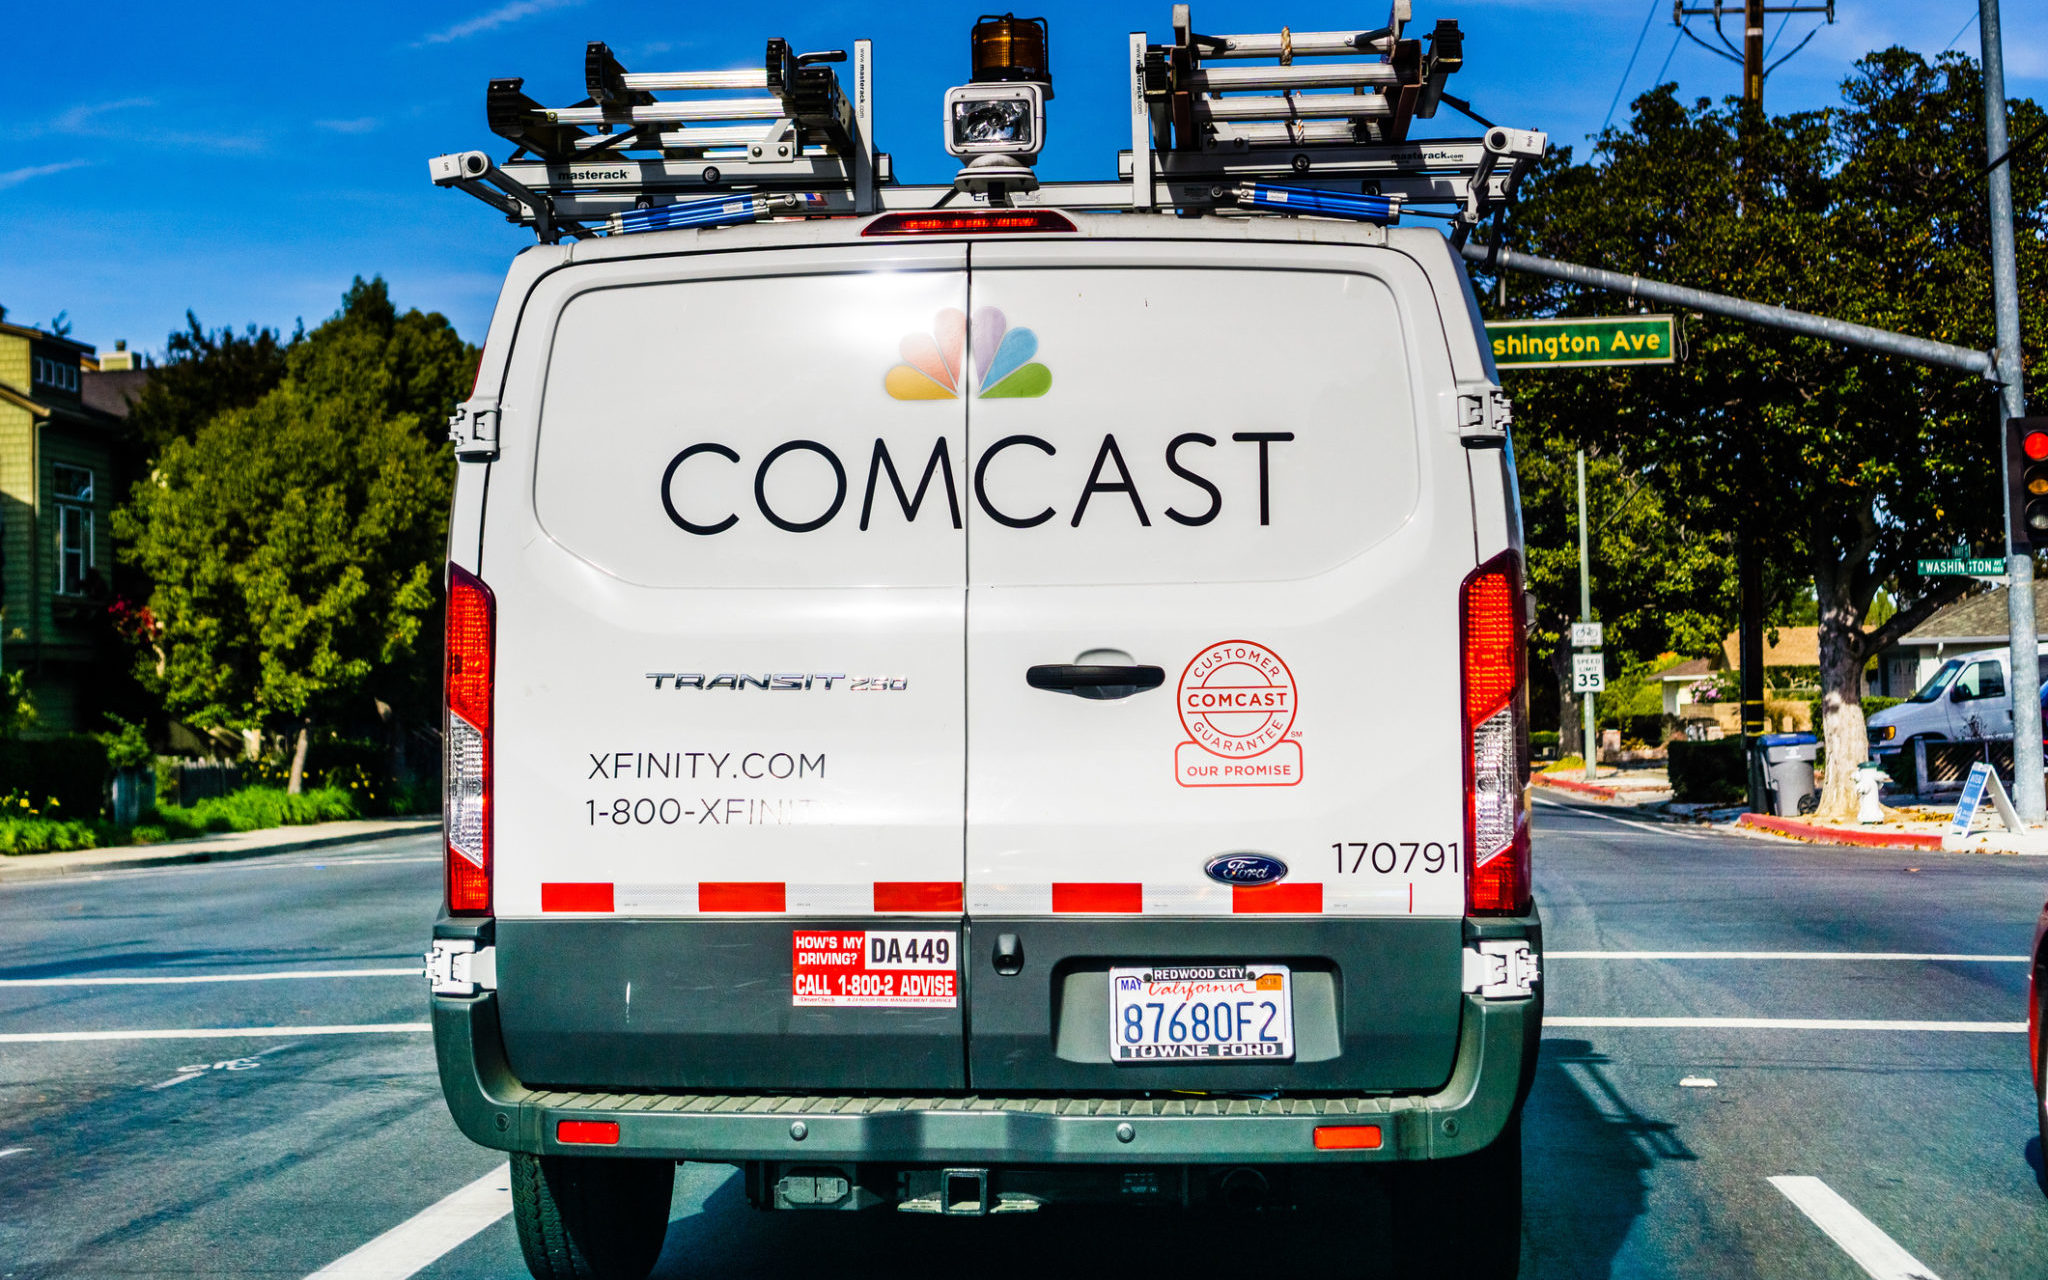 There is A New Scam Targeting Comcast Customers – Here is What You Need To Know To Avoid It